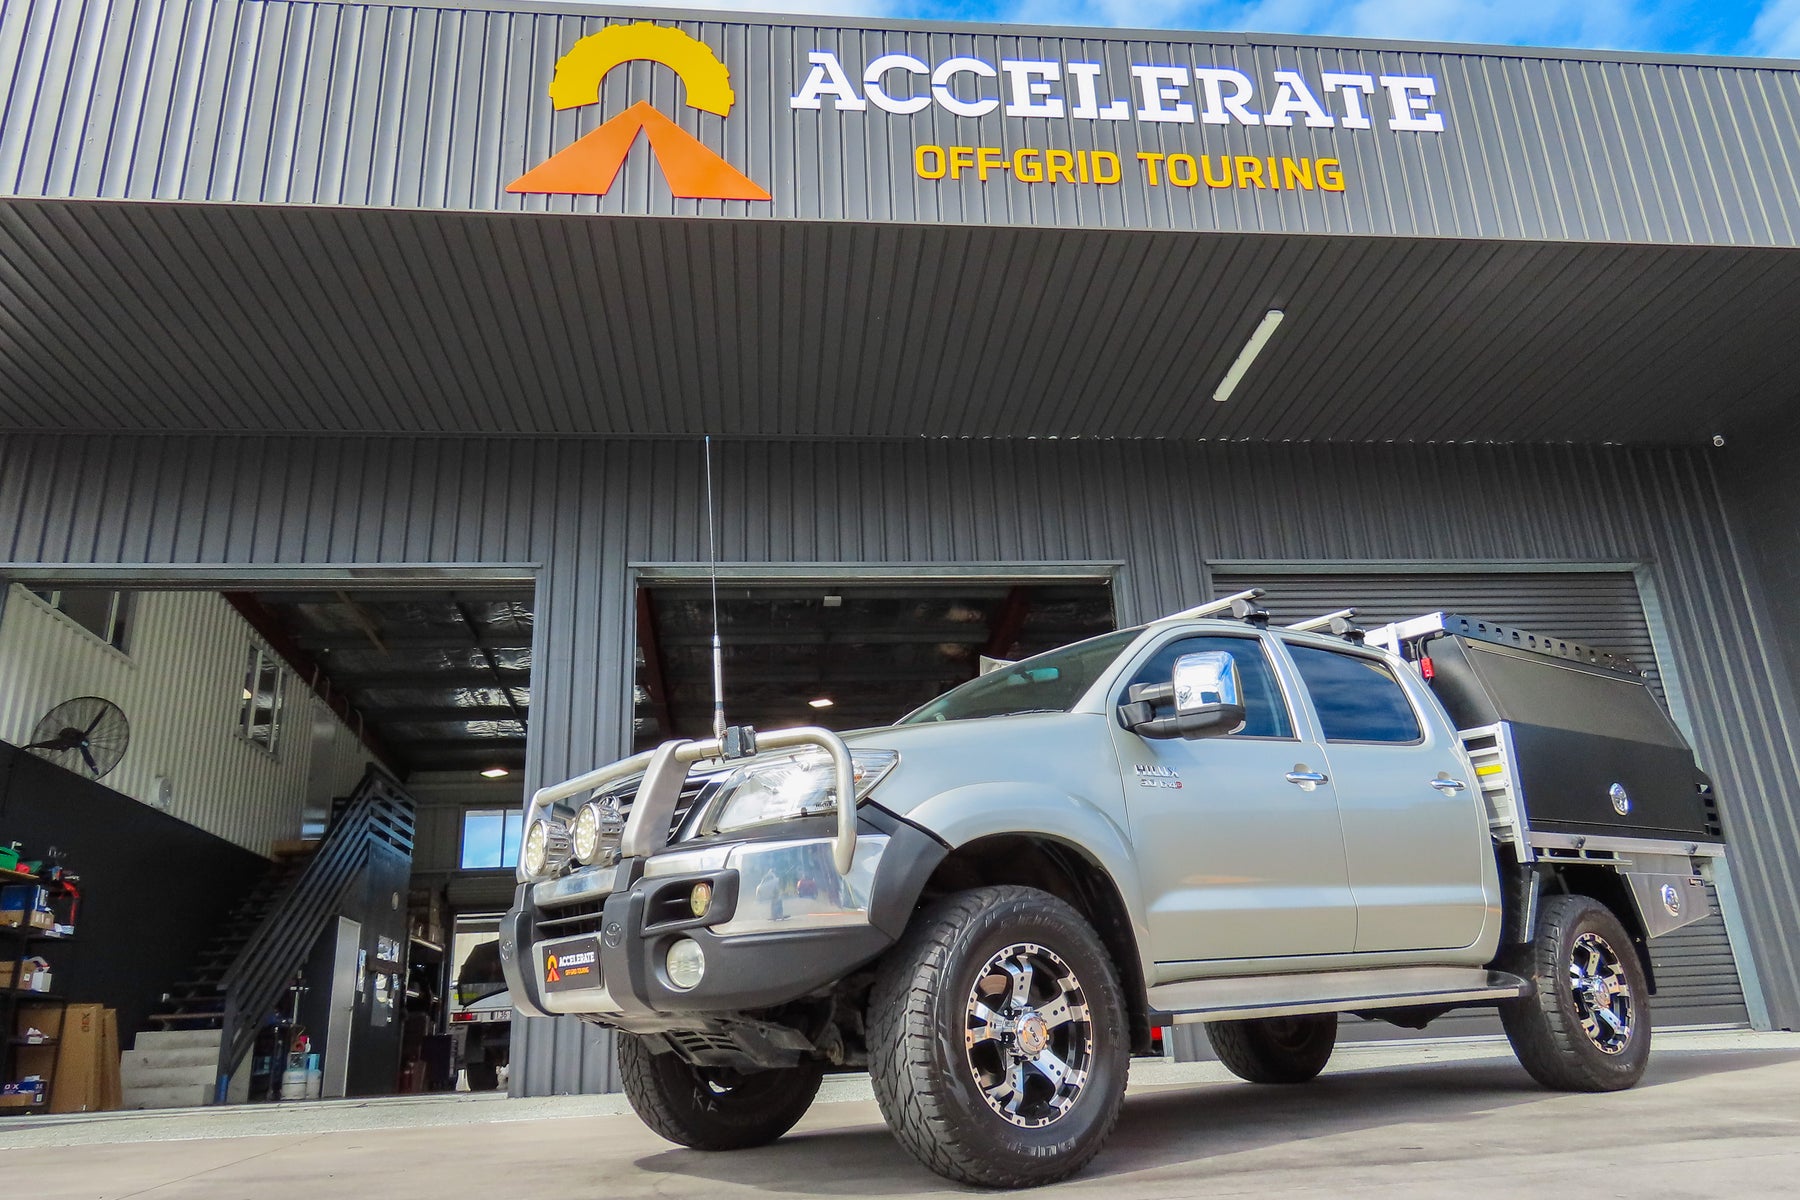 The Ultimate Hilux Canopy Build With Redarc Redvision TVMS and Enerdrive Lithium Power